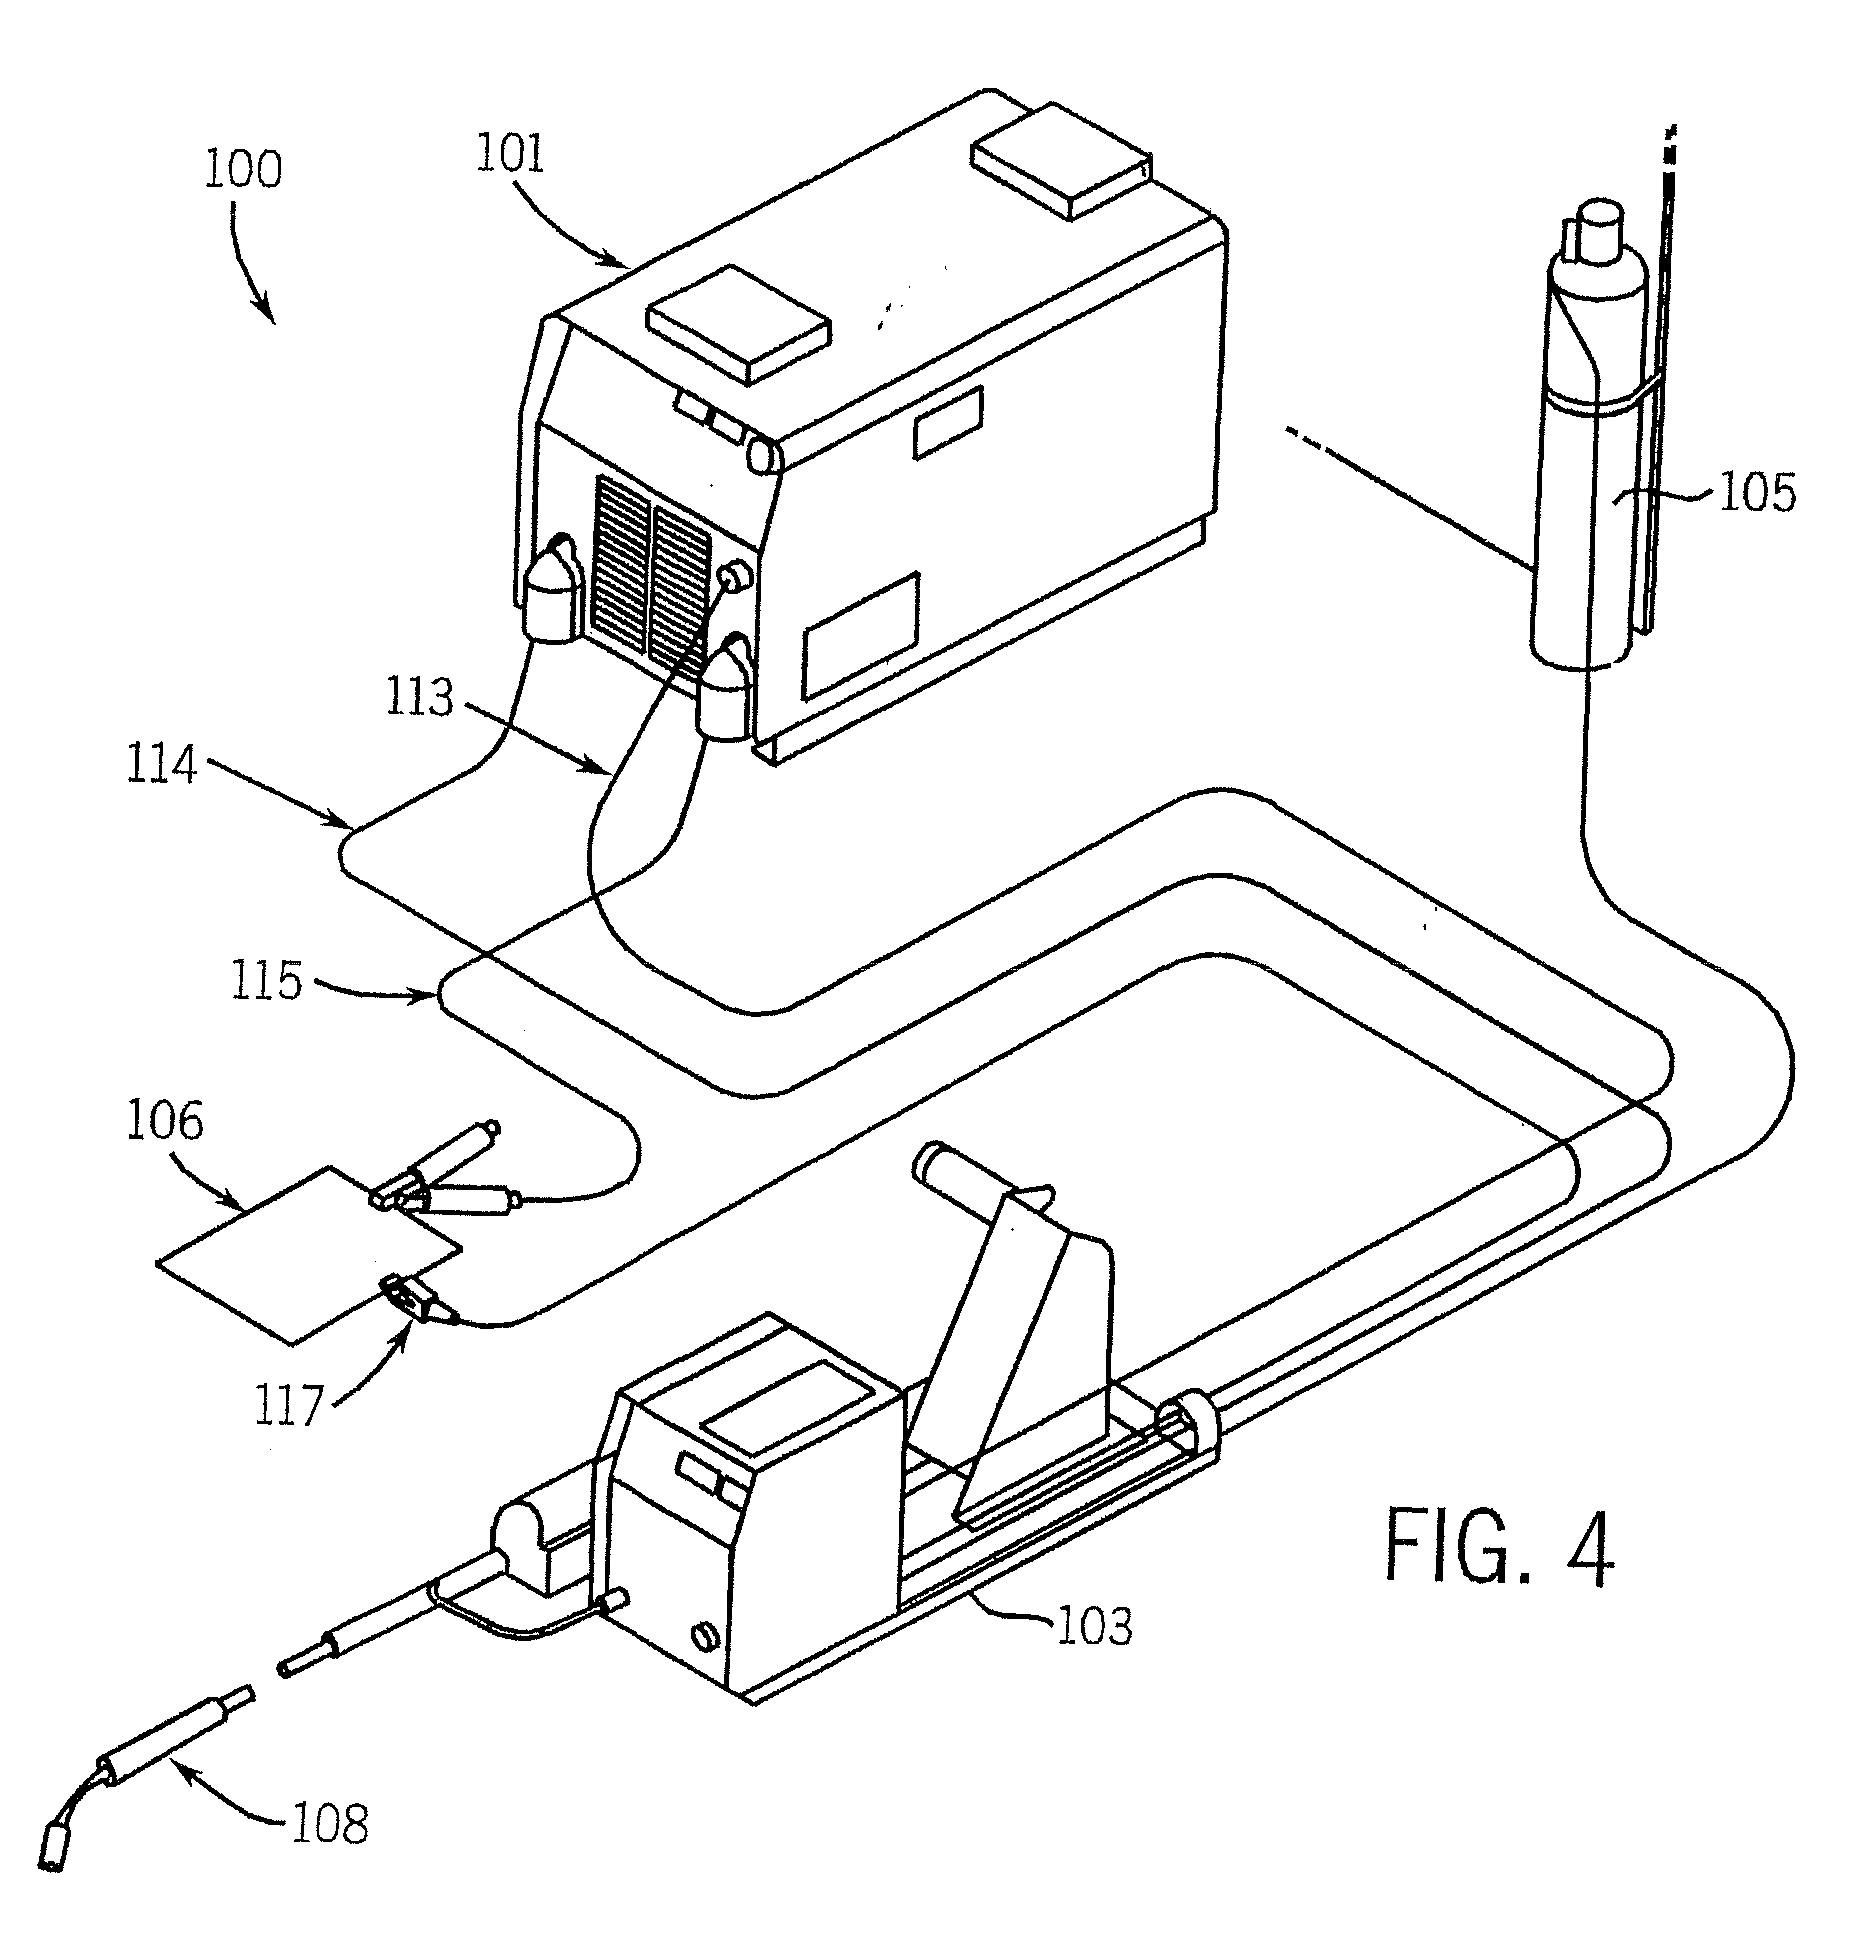 Method and Apparatus For Feeding Wire to a Welding Arc